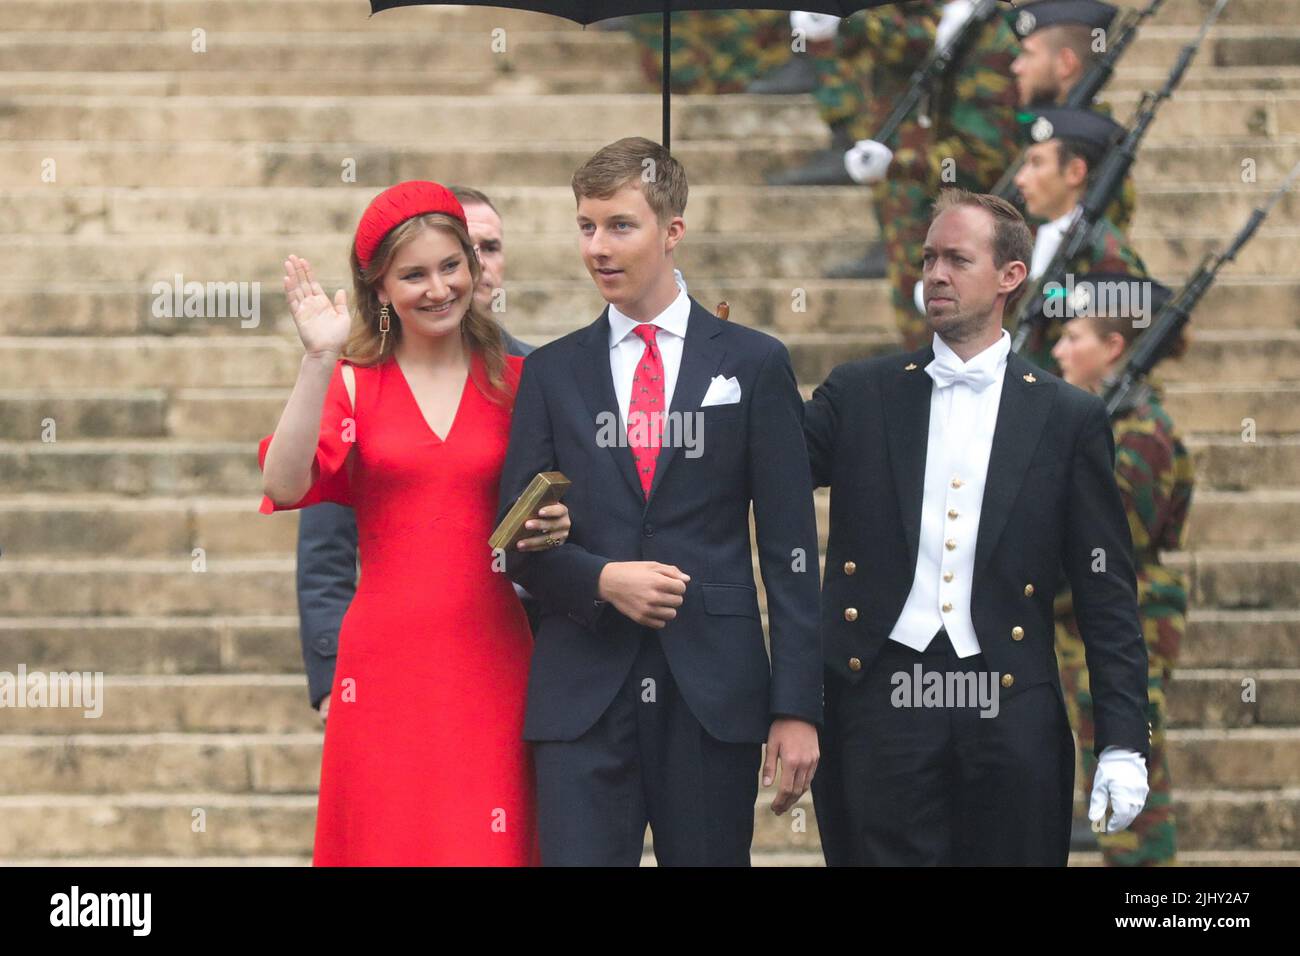 Brussels, Belgium. 21st July, 2022. Princess Elisabeth (L, front) and Prince Emmanuel of Belgium attend an event of Belgian National Day celebrations in Brussels, Belgium, July 21, 2022. Belgium celebrated its National Day on July 21. Credit: Zheng Huansong/Xinhua/Alamy Live News Stock Photo